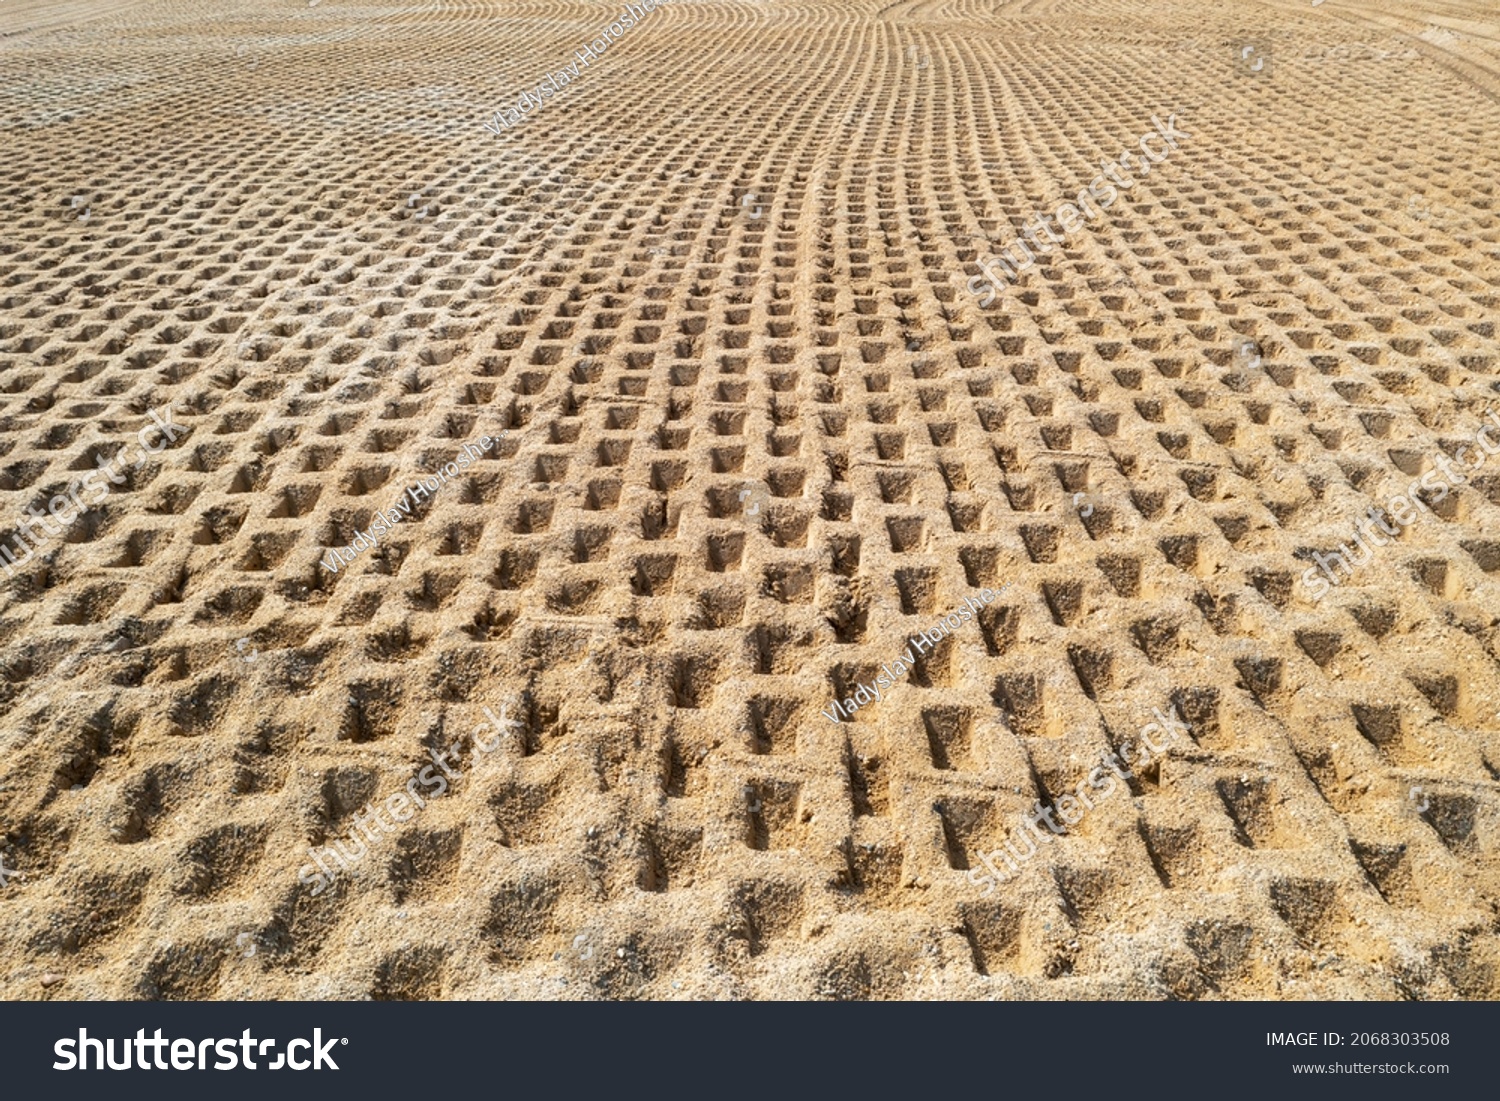 Compaction of soil at the construction site, compaction of soil before construction #2068303508